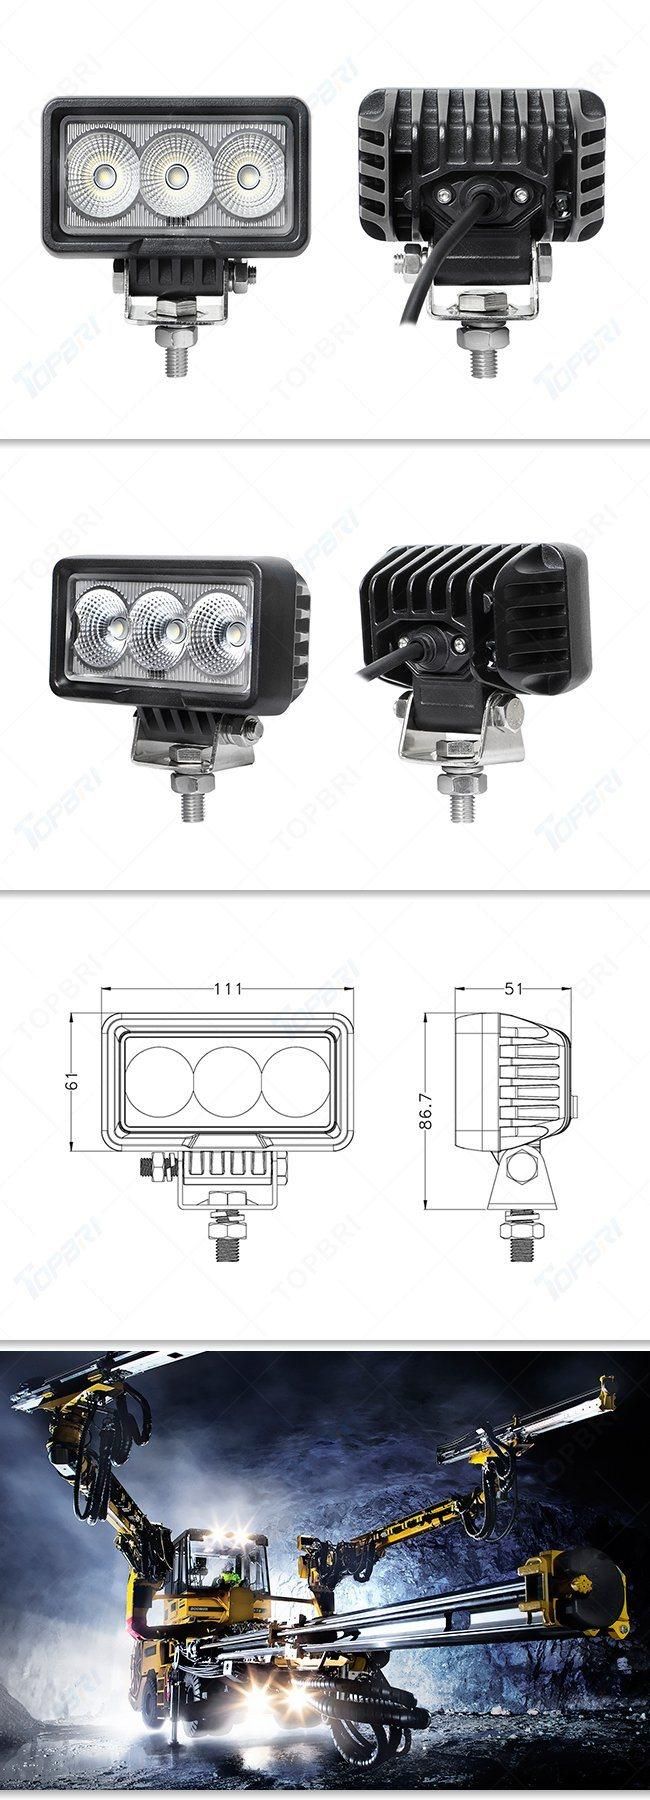 Wholesale IP67 Square Flood 30W 12 Volt LED Auxiliary Driving Work Light for Motorcycle Vehicle